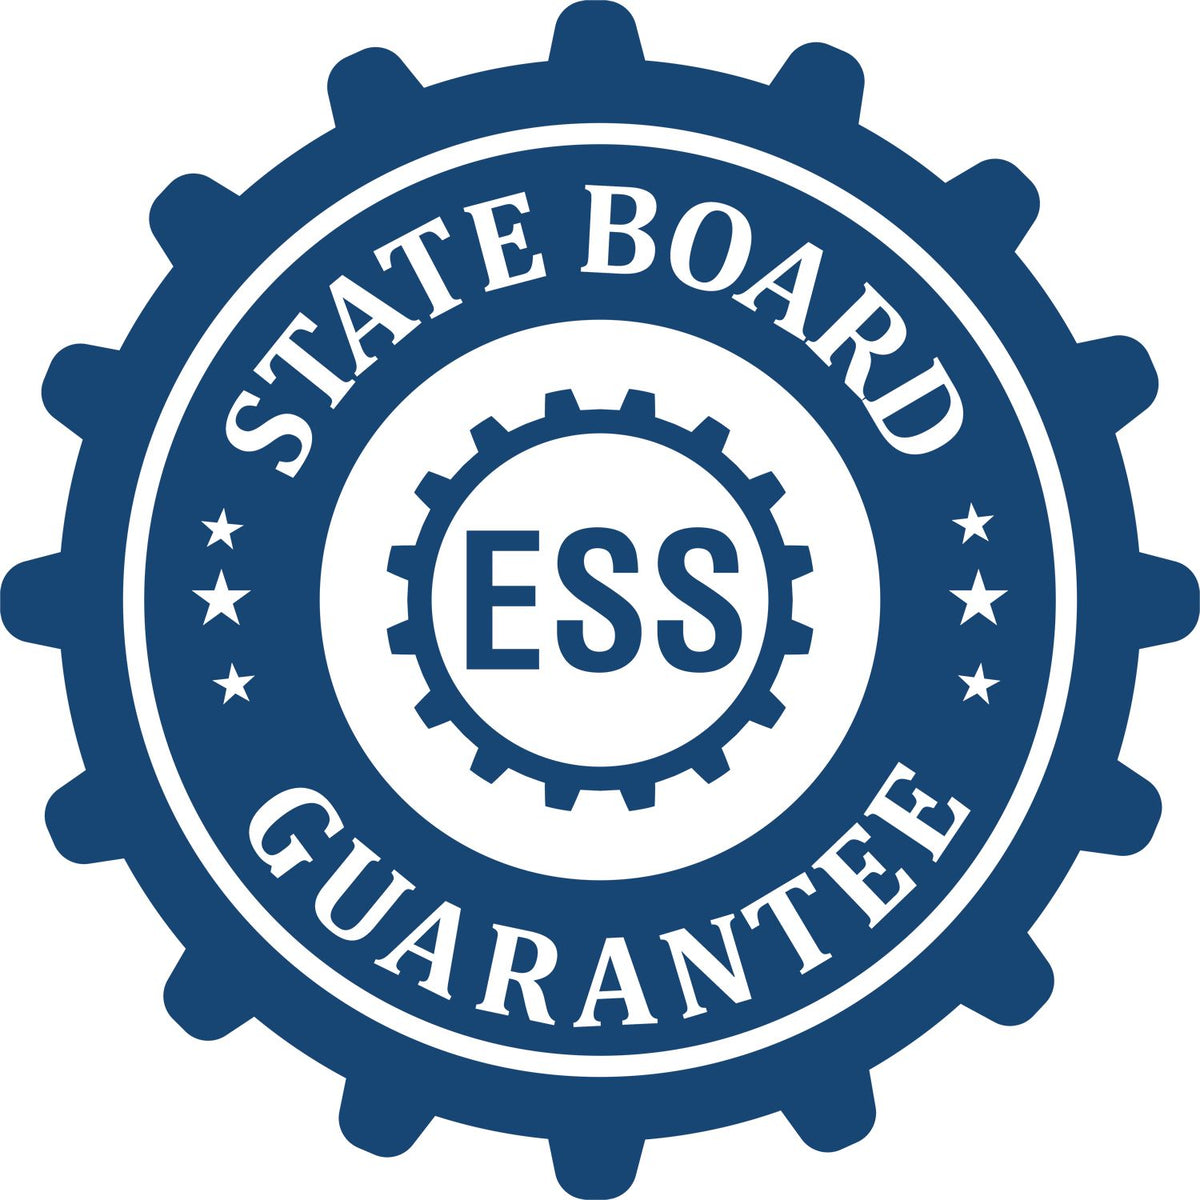 An emblem in a gear shape illustrating a state board guarantee for the Heavy-Duty Michigan Rectangular Notary Stamp product.